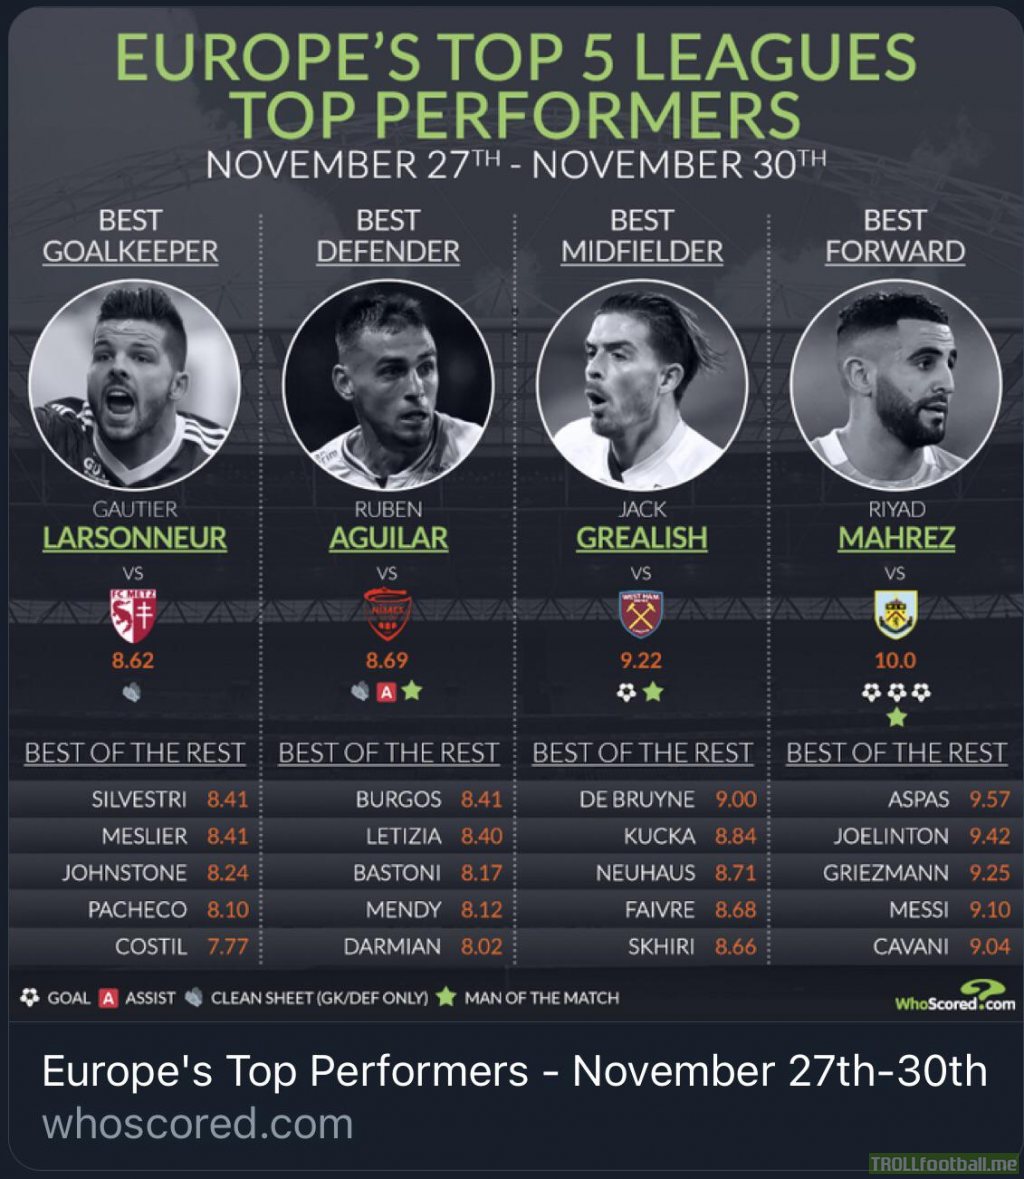 Europe’s Top 5 leagues’ Top Performers. 27th-30th November.